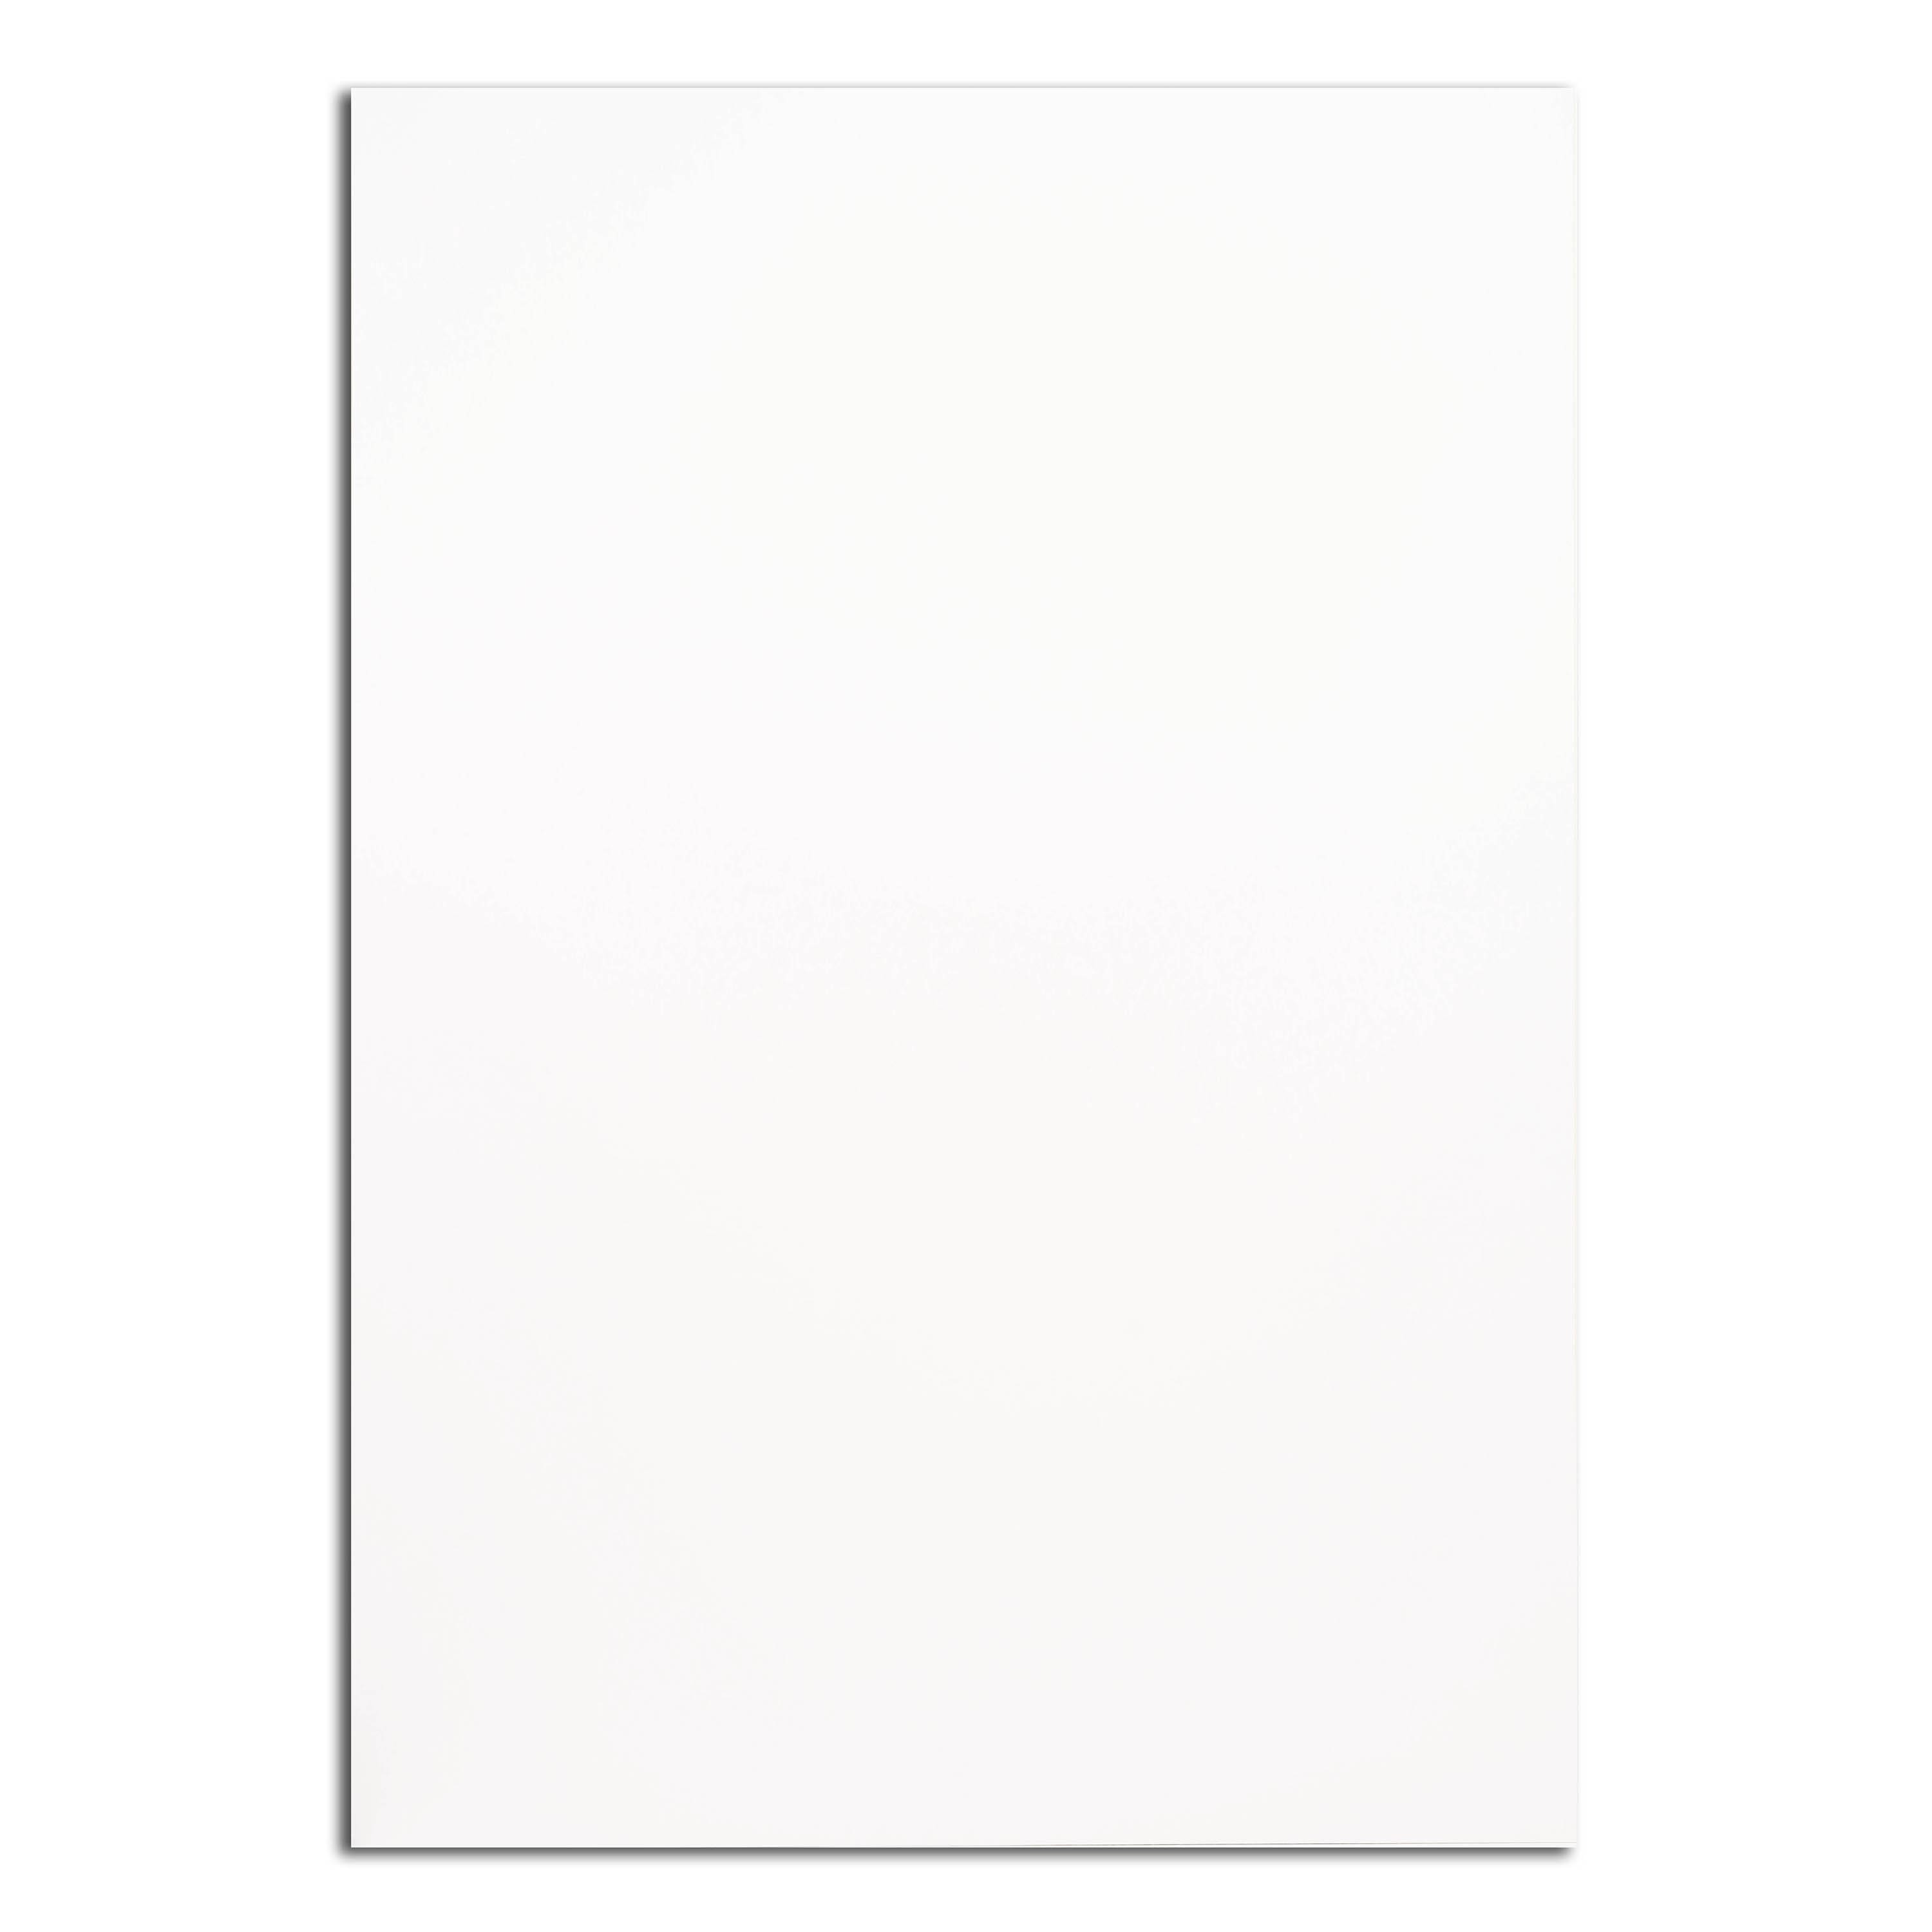  Mat Board Center, 16x20 Uncut Photo Mat Boards - Full Sheet -  for Art, Prints, Photos, Prints and More, Mixed Color, 25-Pack